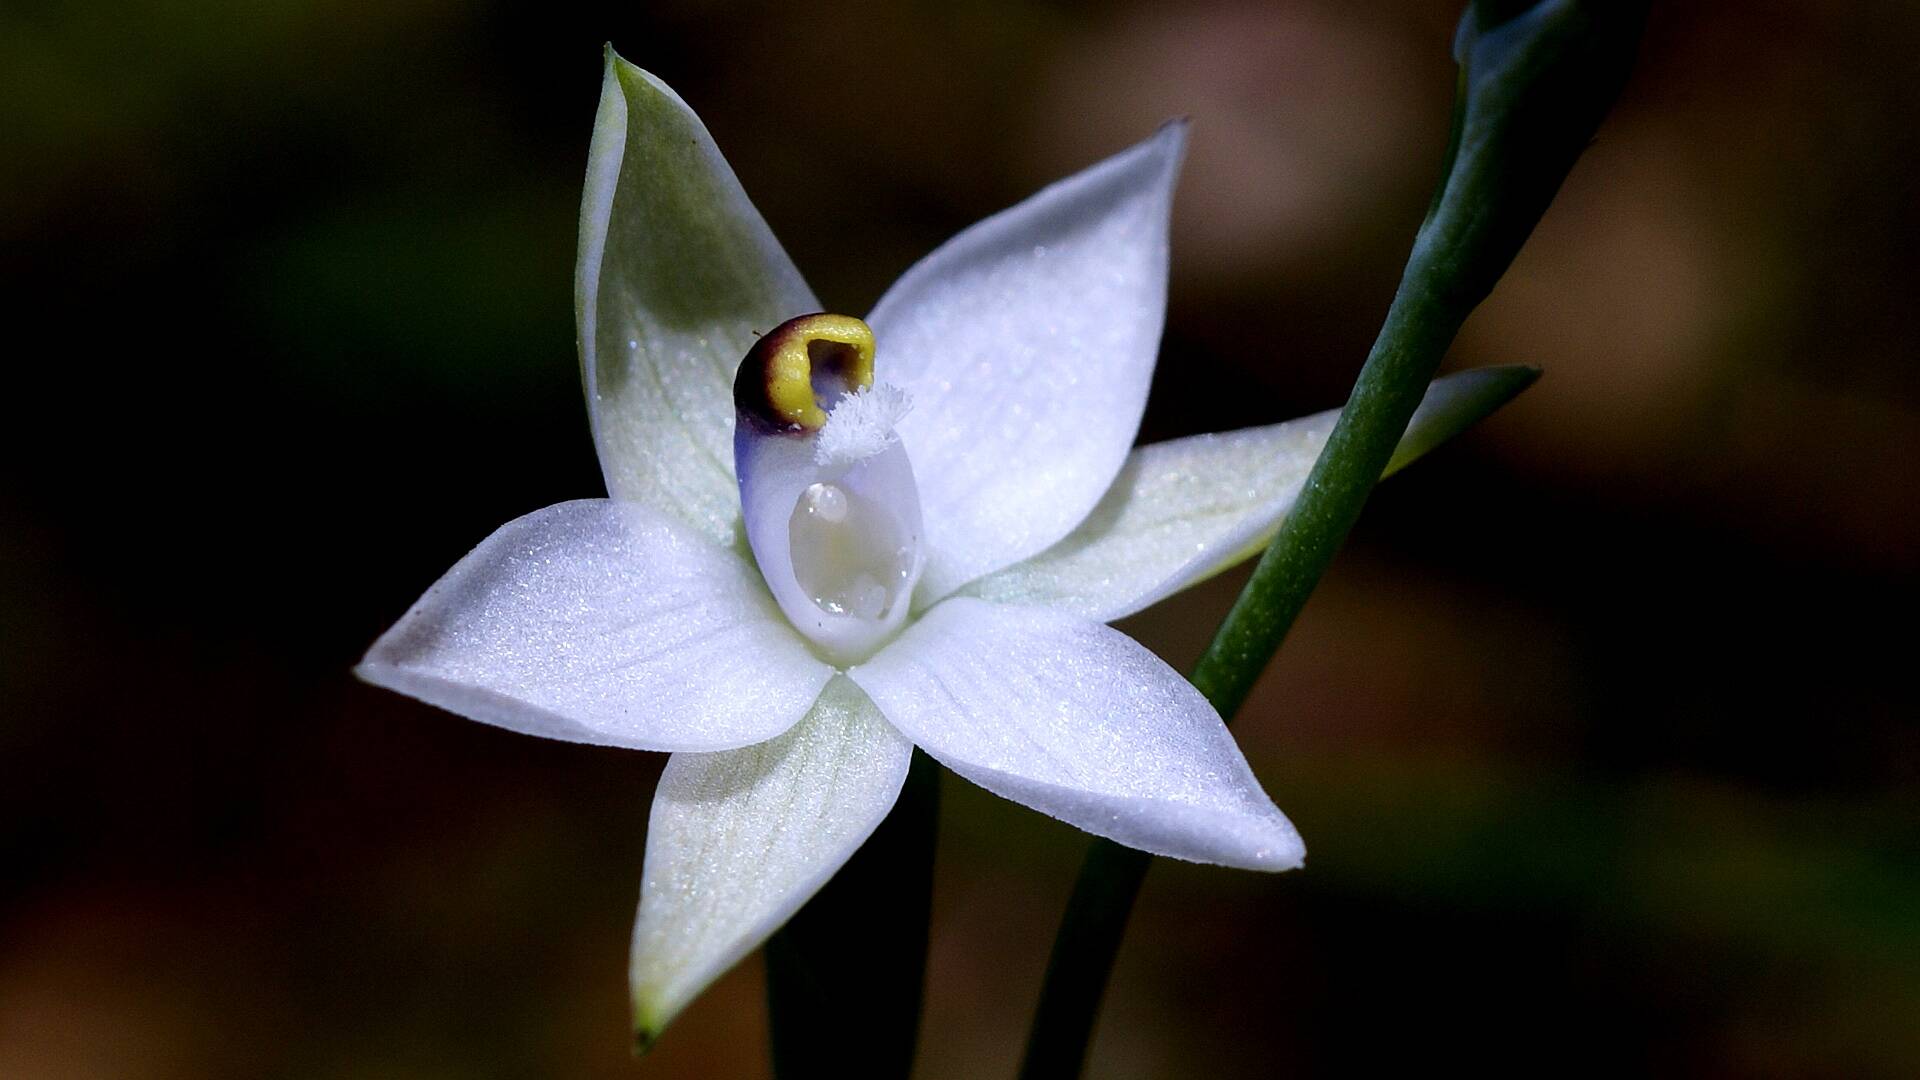 Small White Sun-orchid (Thelymitra albiflora)